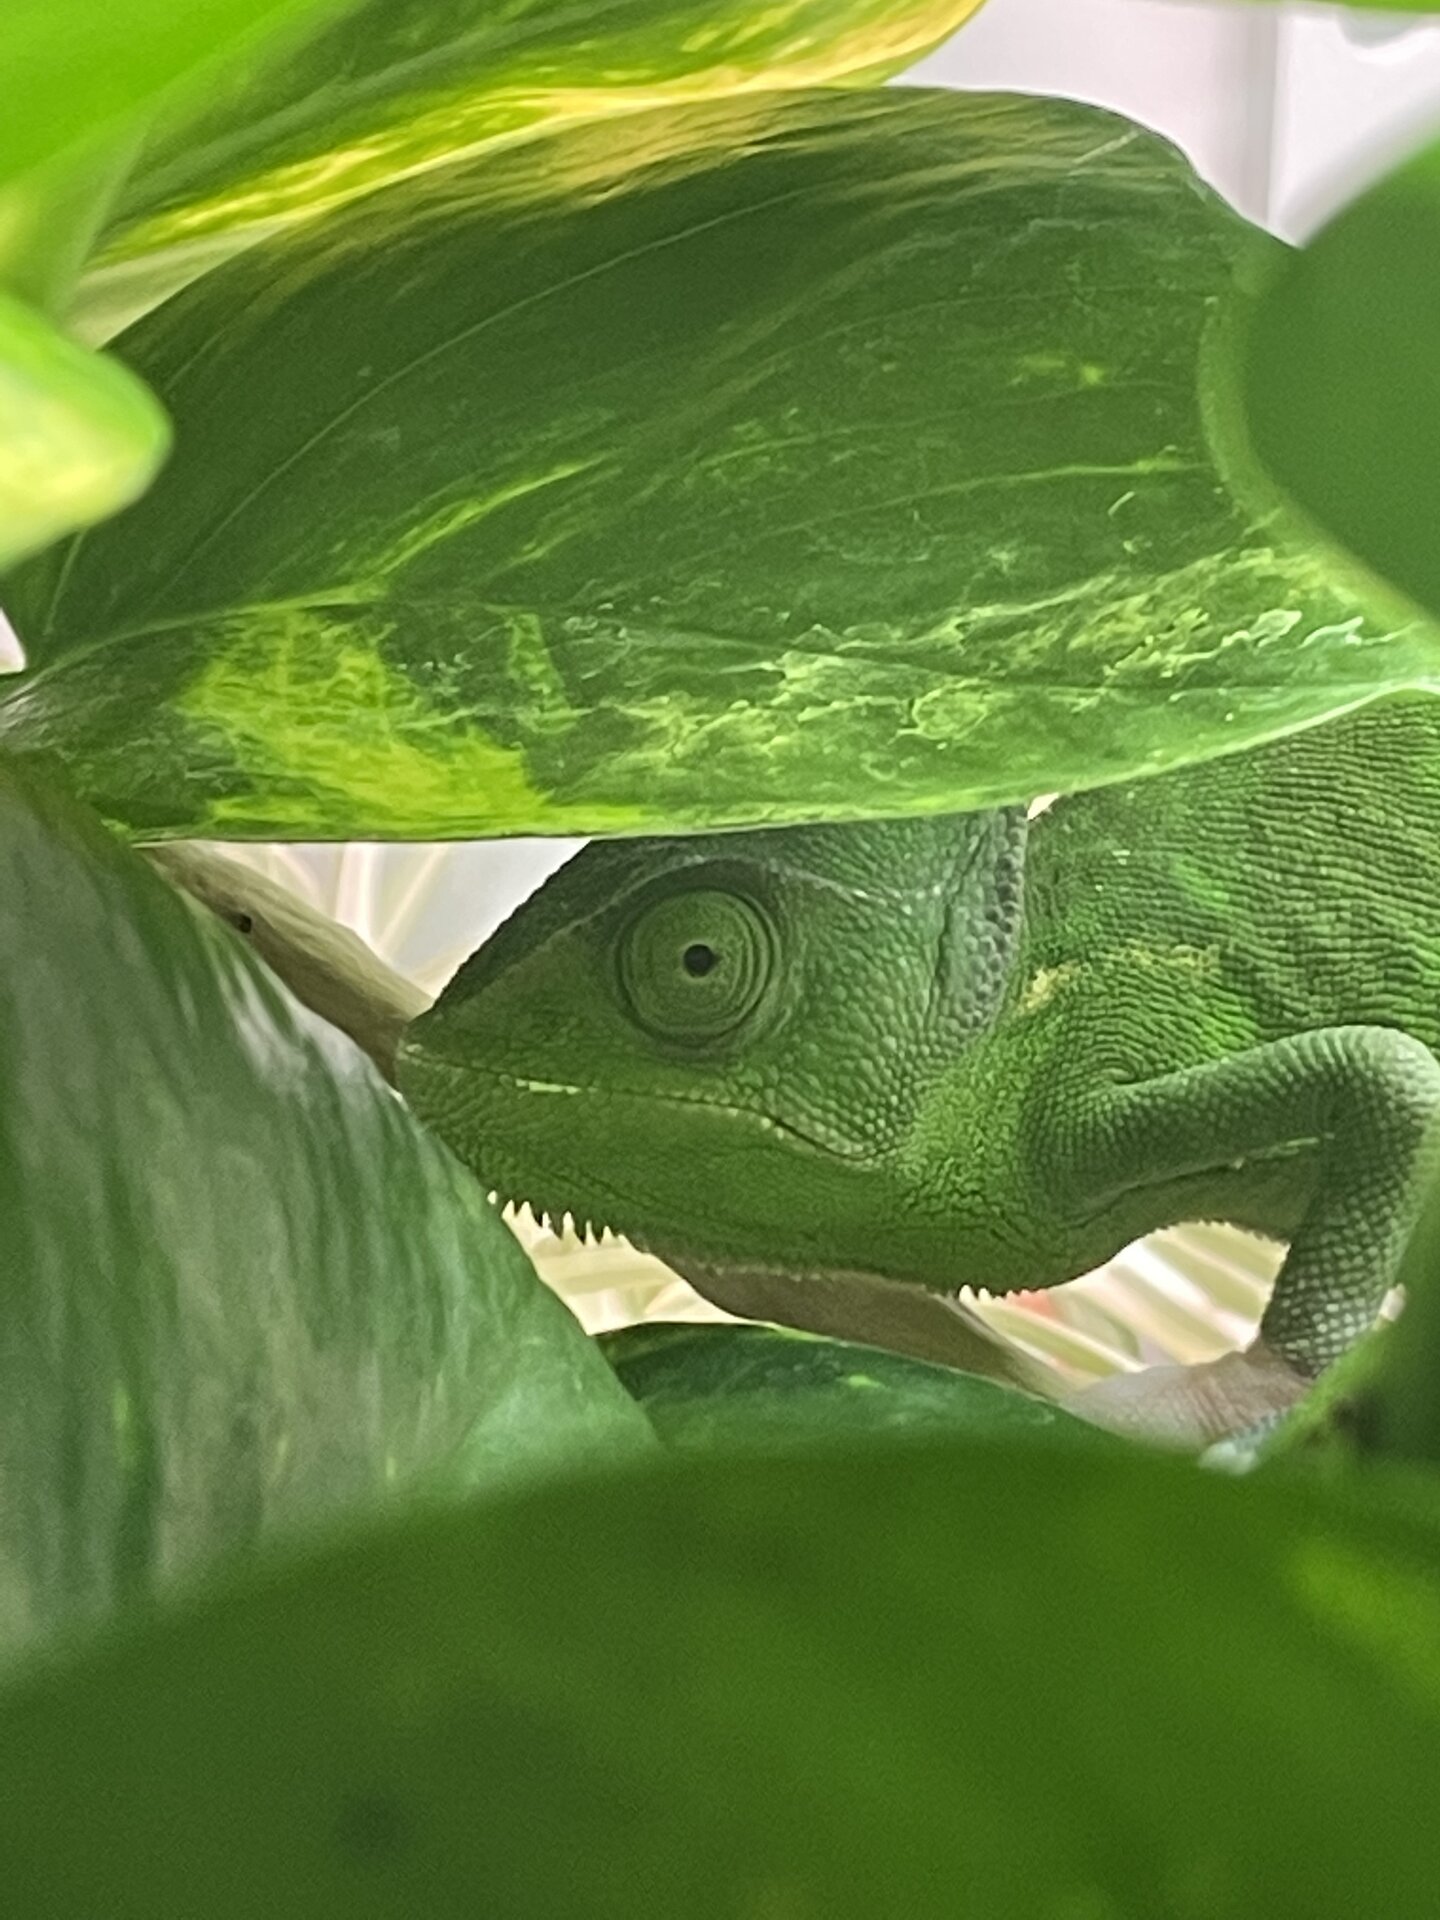 Green, green and oh! A chameleon!